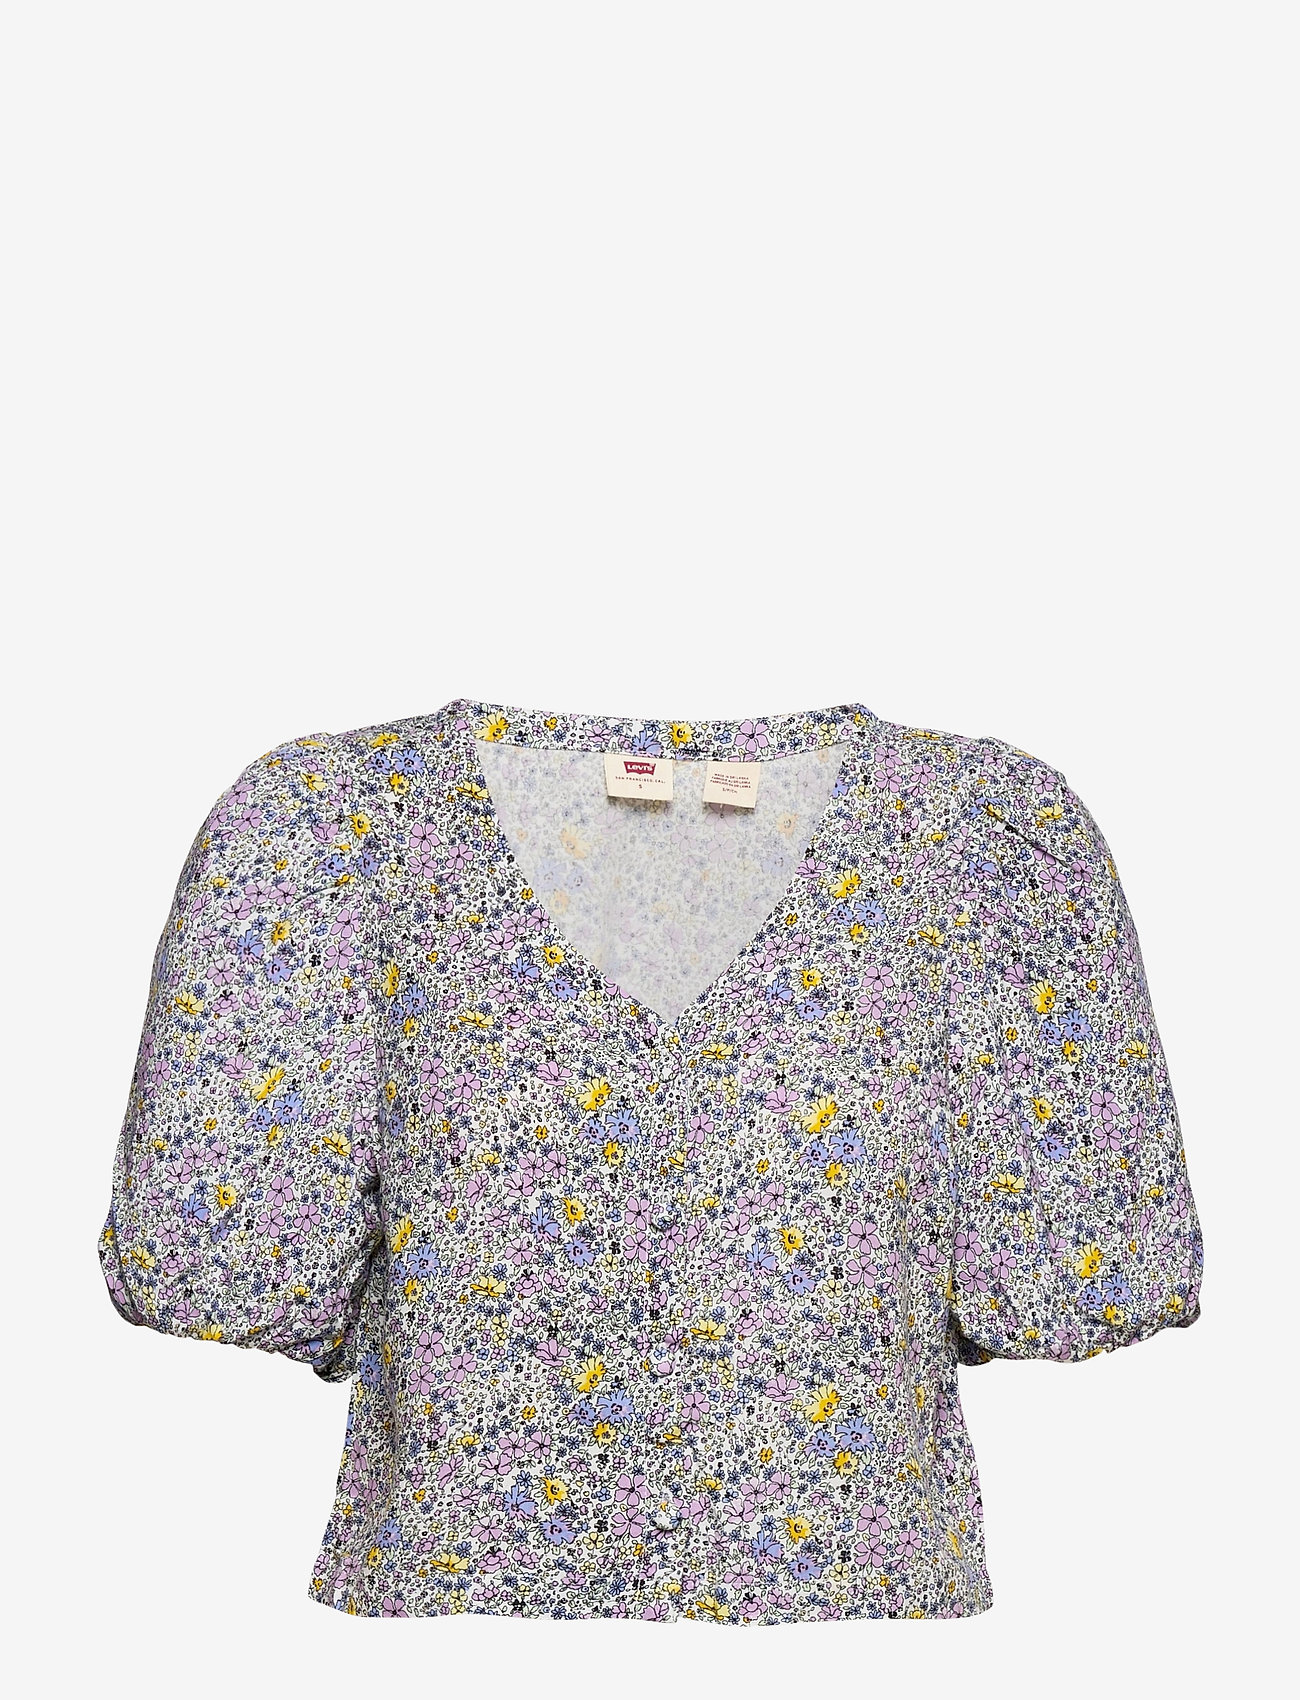 Holly Blouse Monrovia Floral L (Multi 